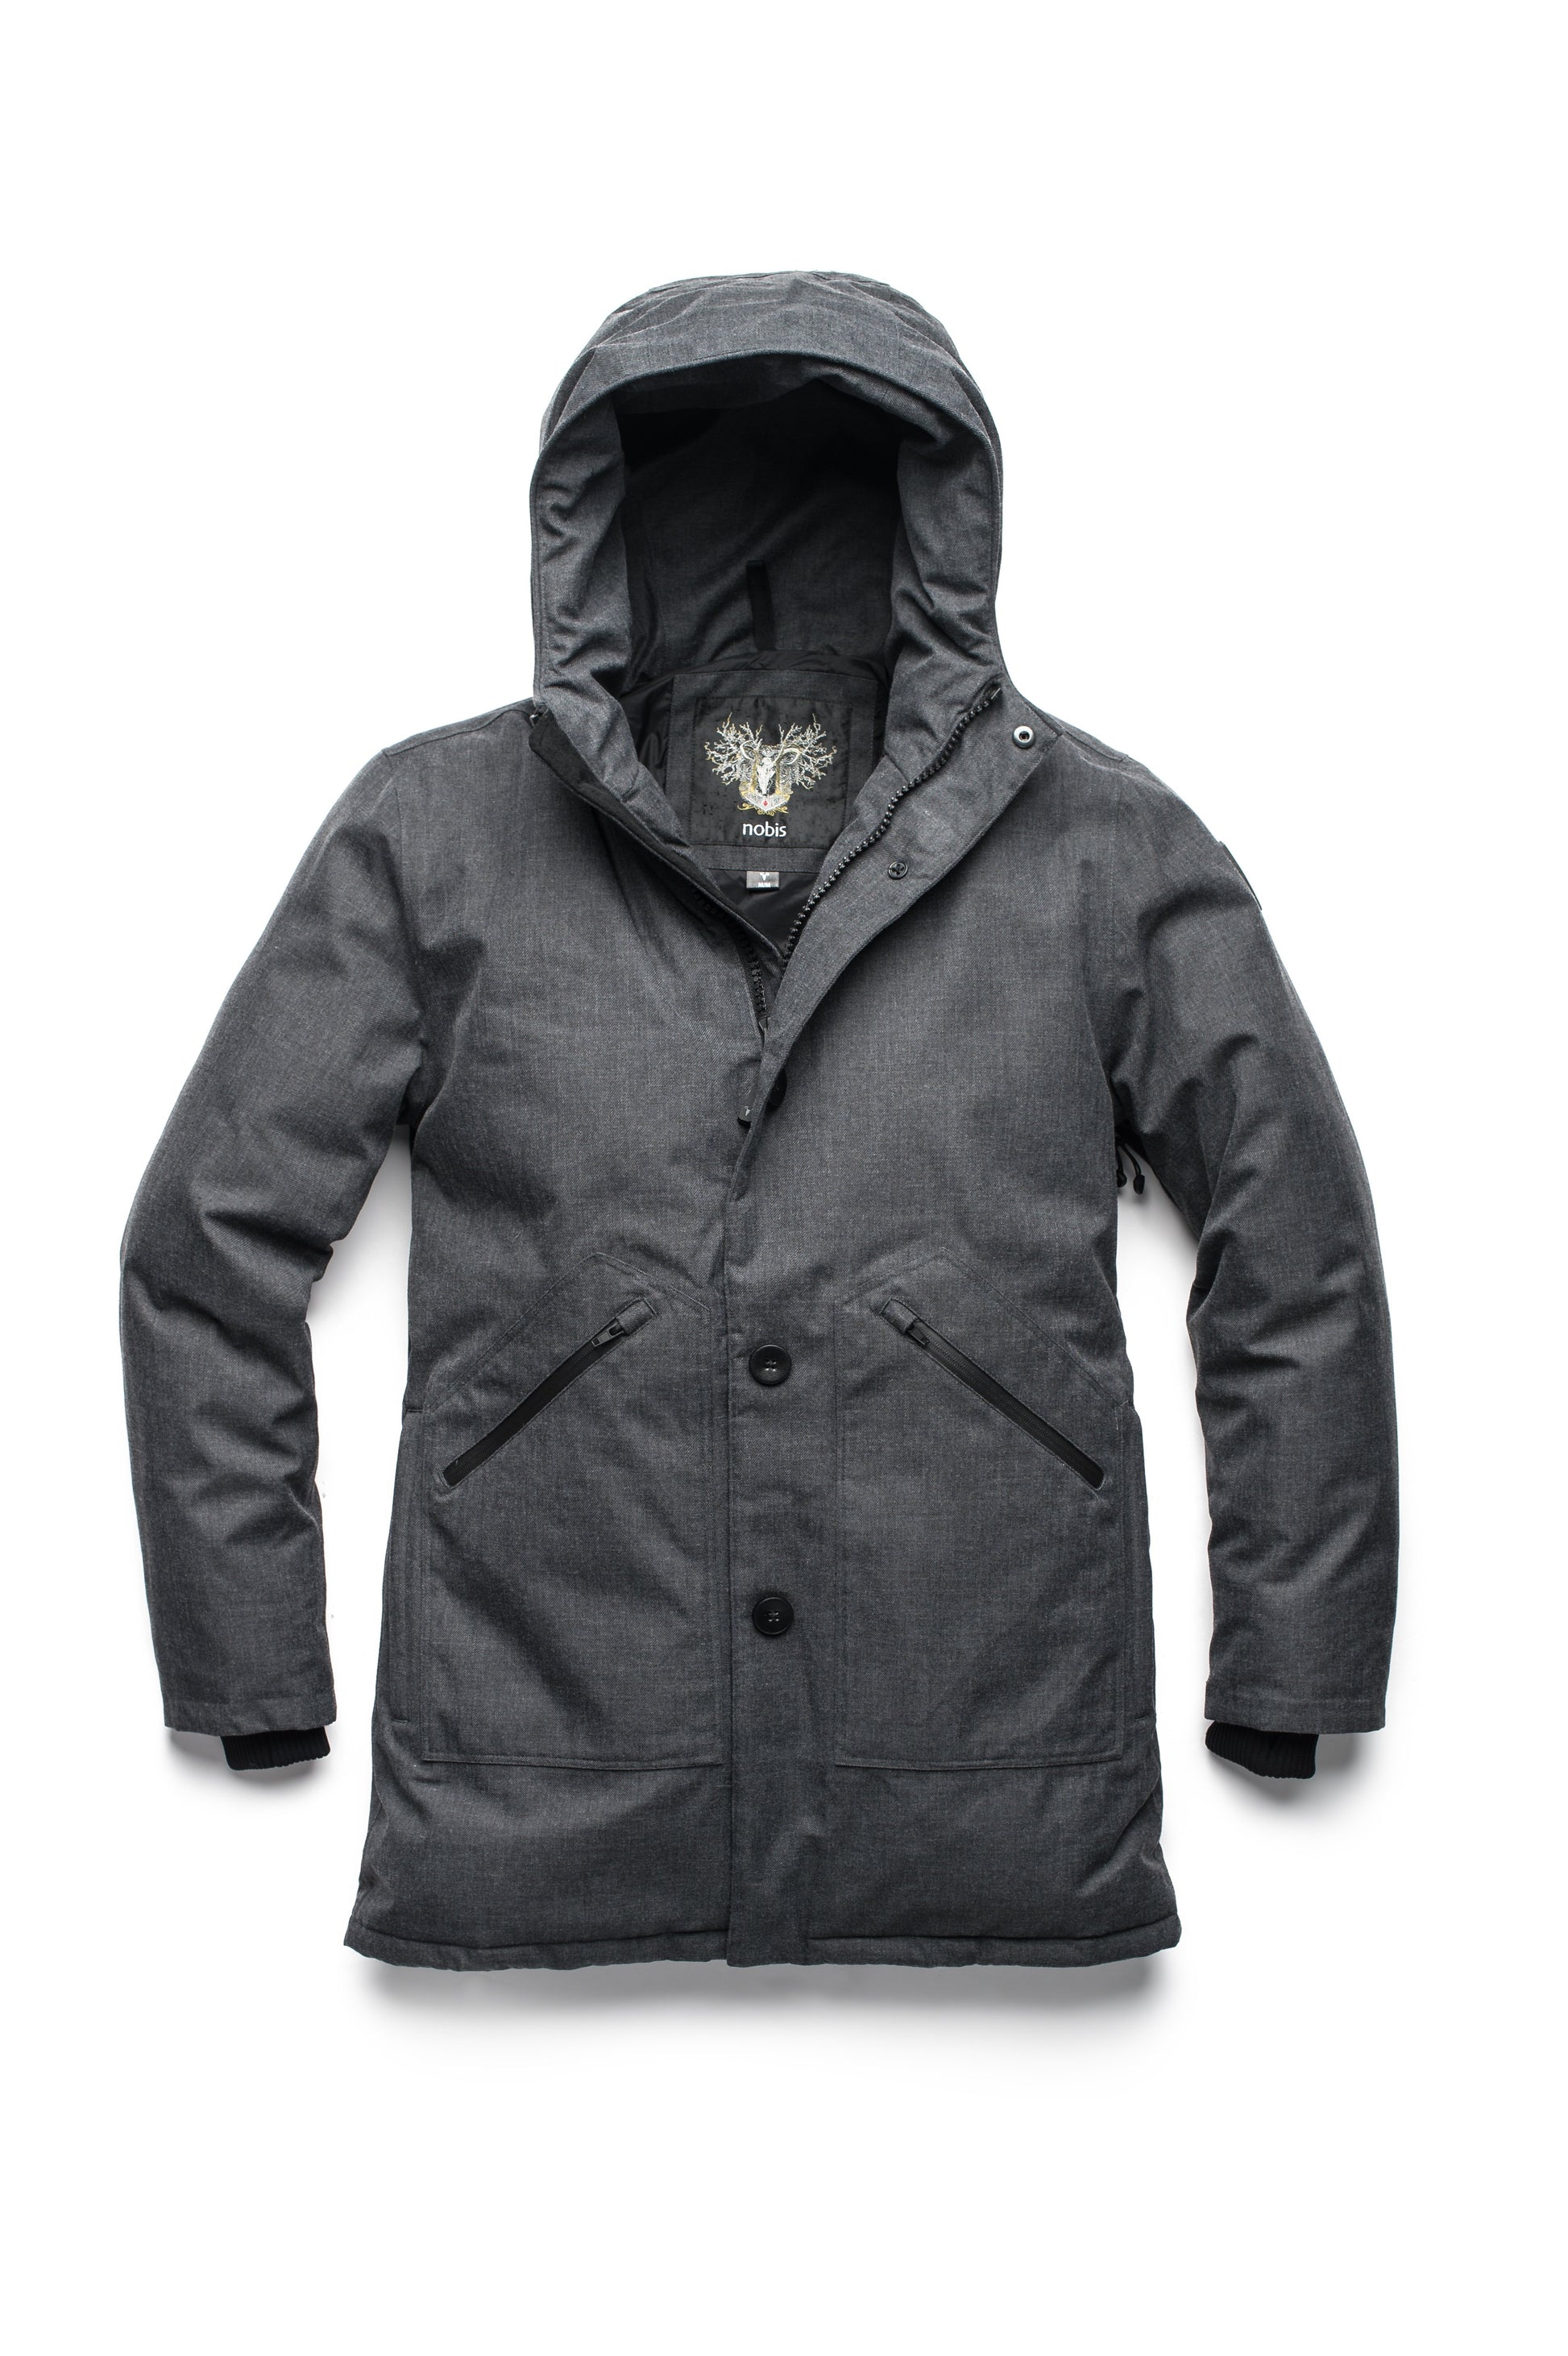 Men's fur free hooded parka with zipper and button closure placket featuring two oversized front pockets in H. Charcoal